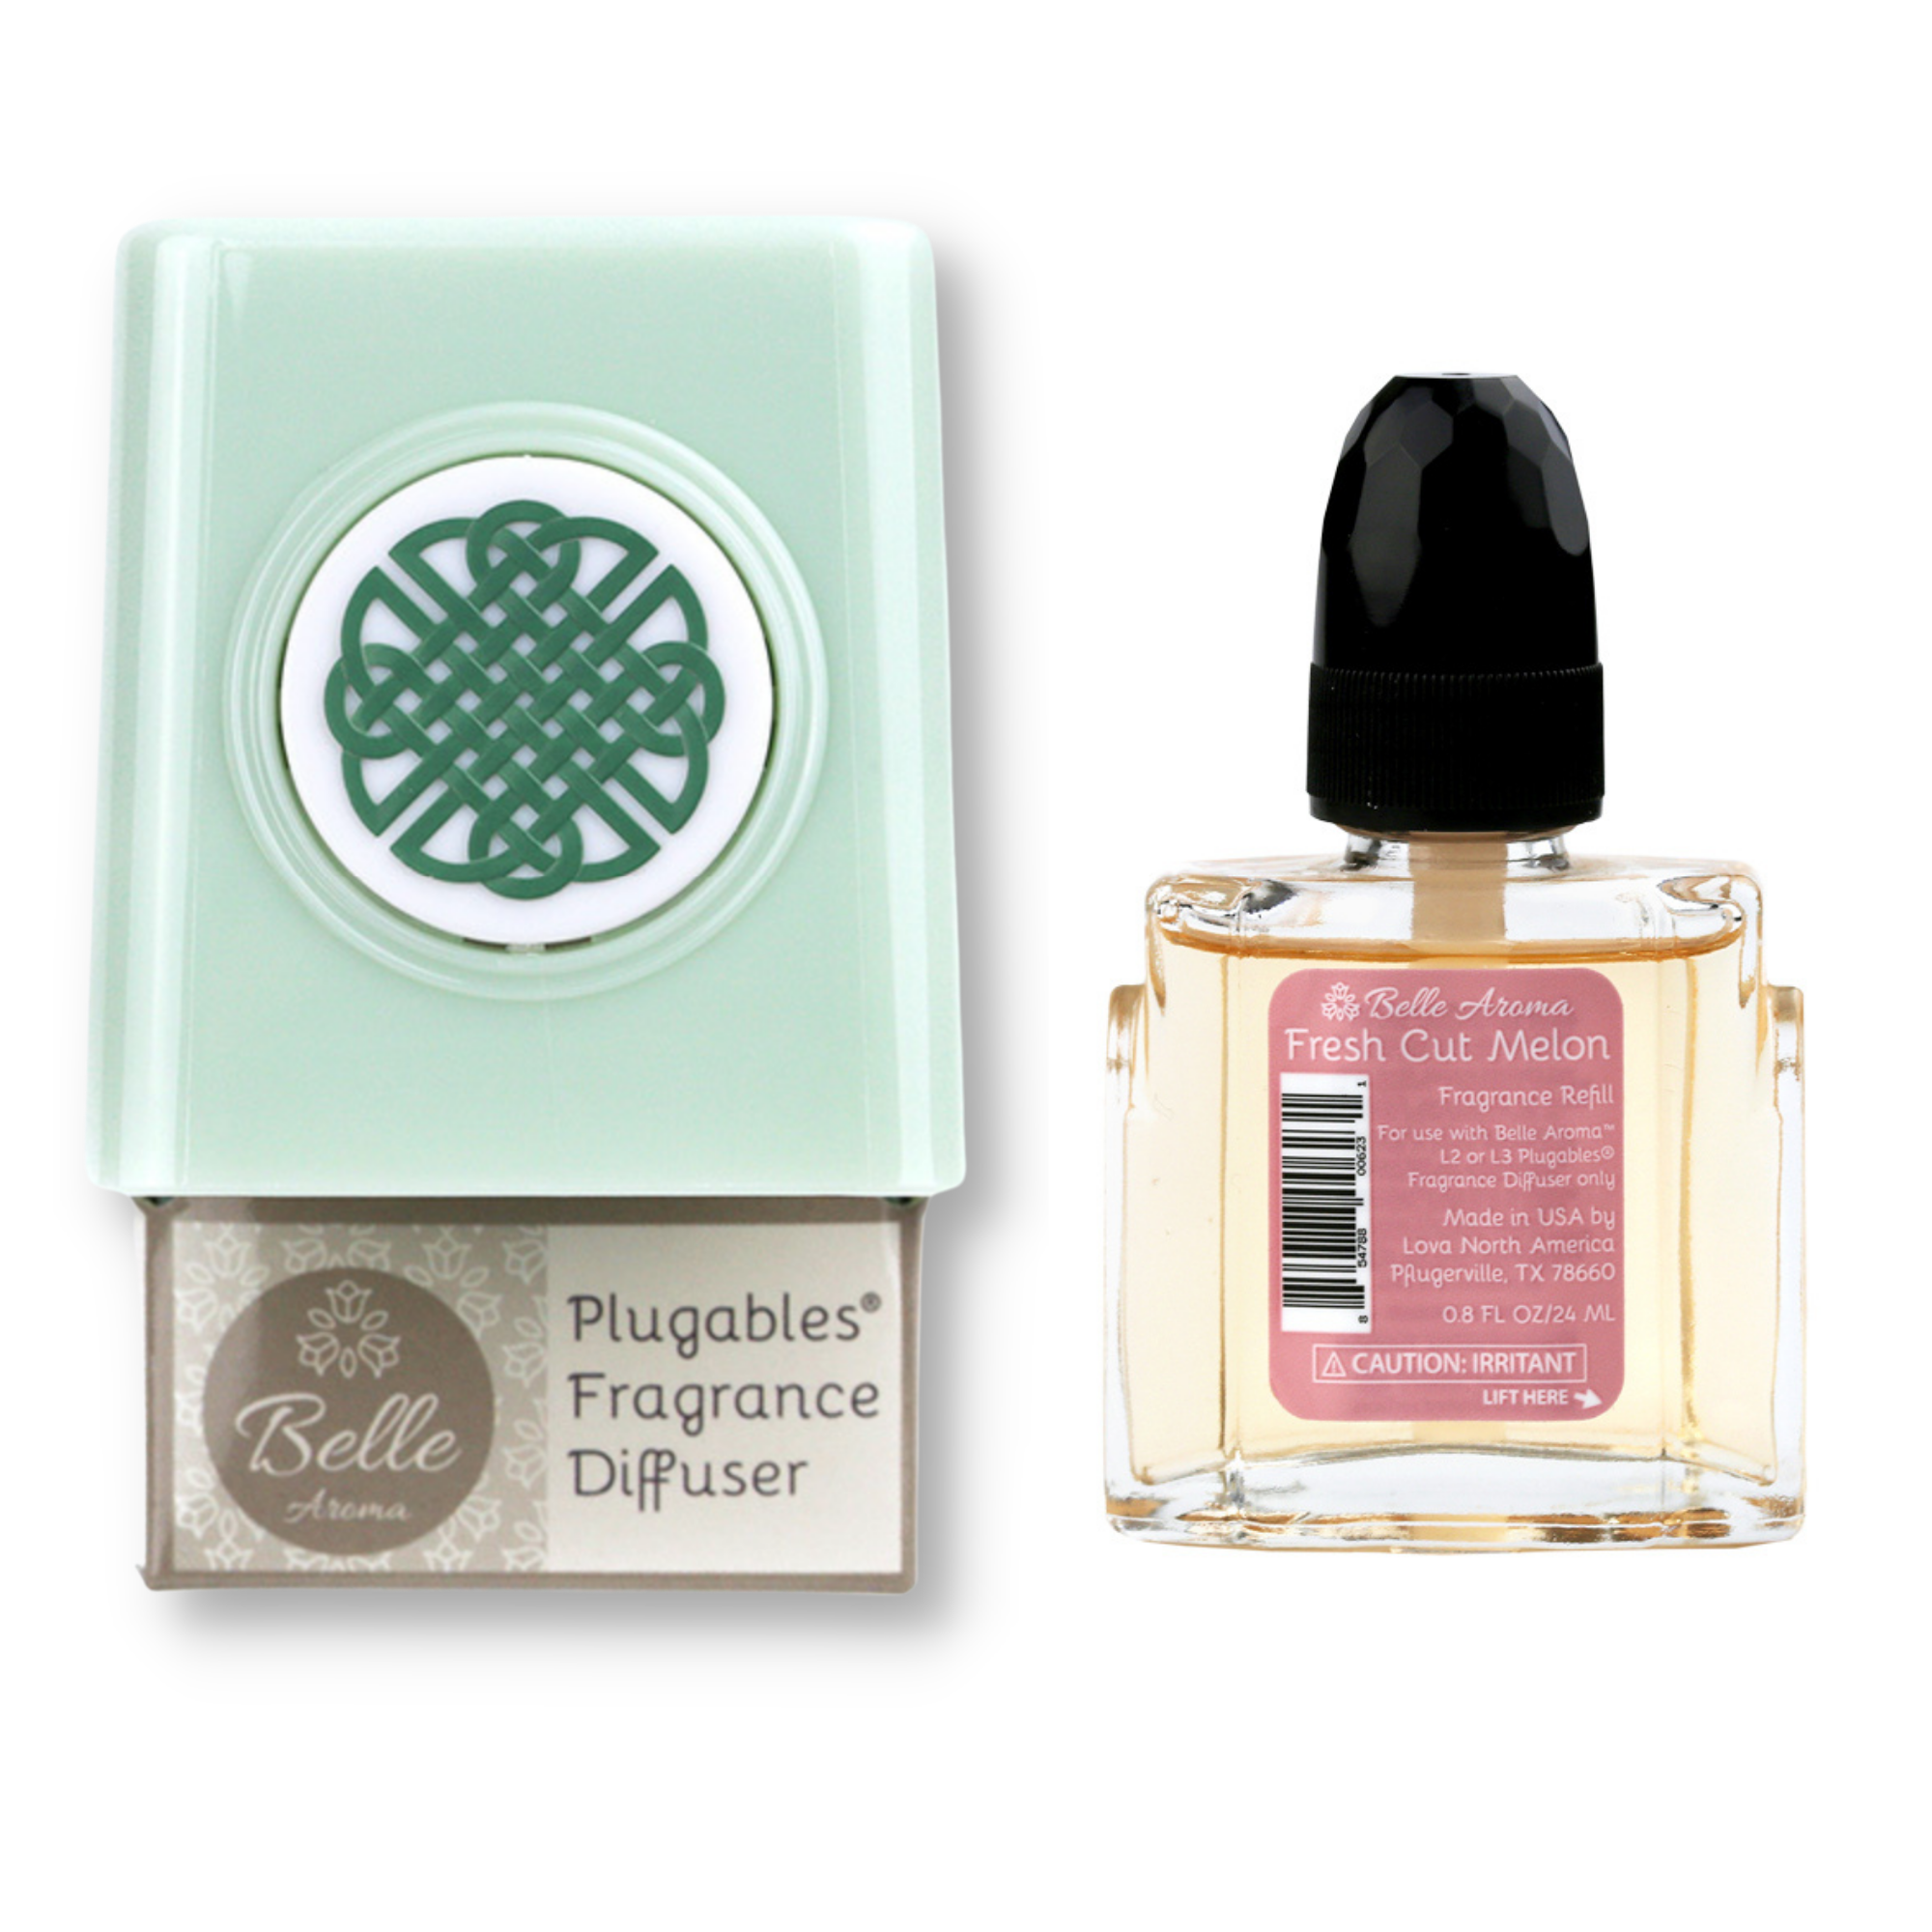 Celtic Knot Medallion Plugables® Plugin Electric Scented Oil Diffuser - Sea Glass with Fresh Cut Melon Fragrance Oil Home Fragrance Accessories